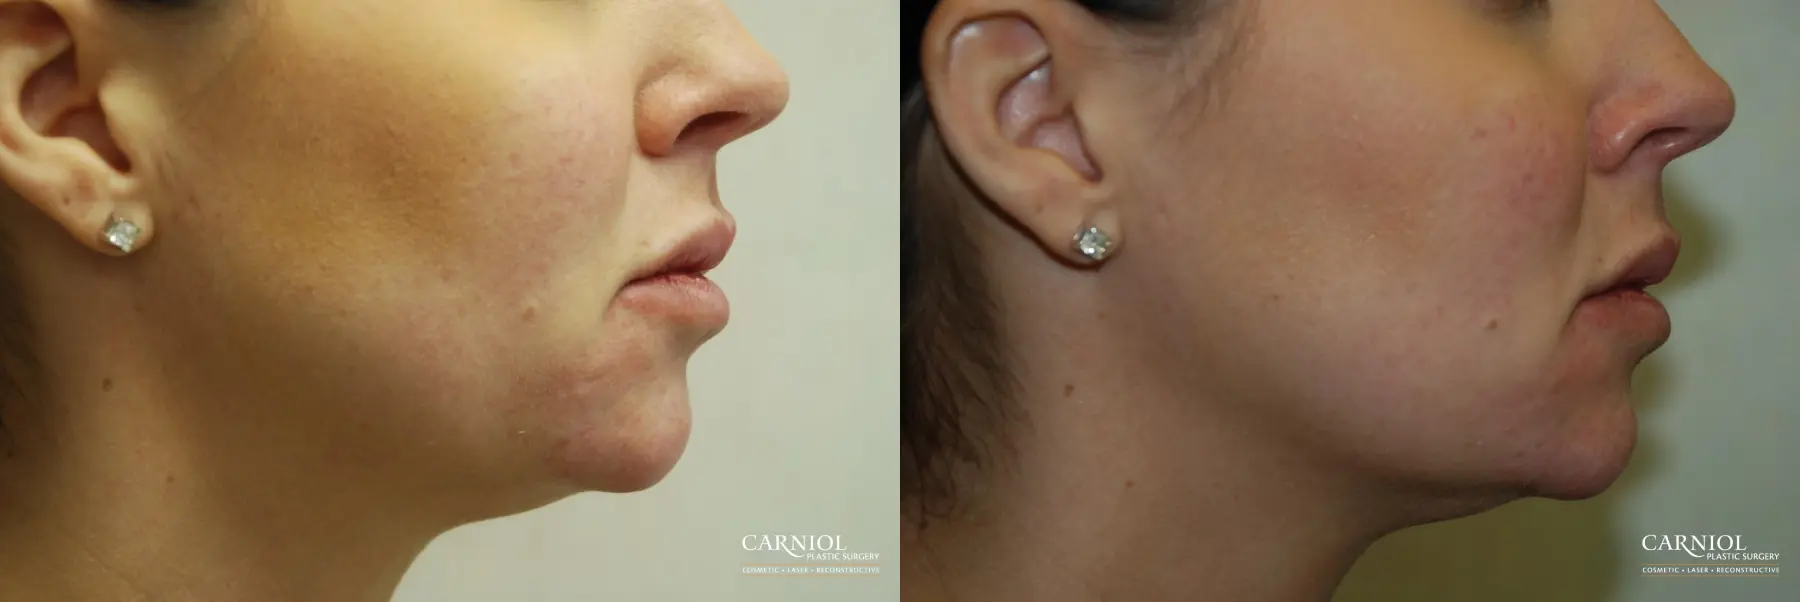 Non-Surgical Mini-Facelift: Patient 4 - Before and After  